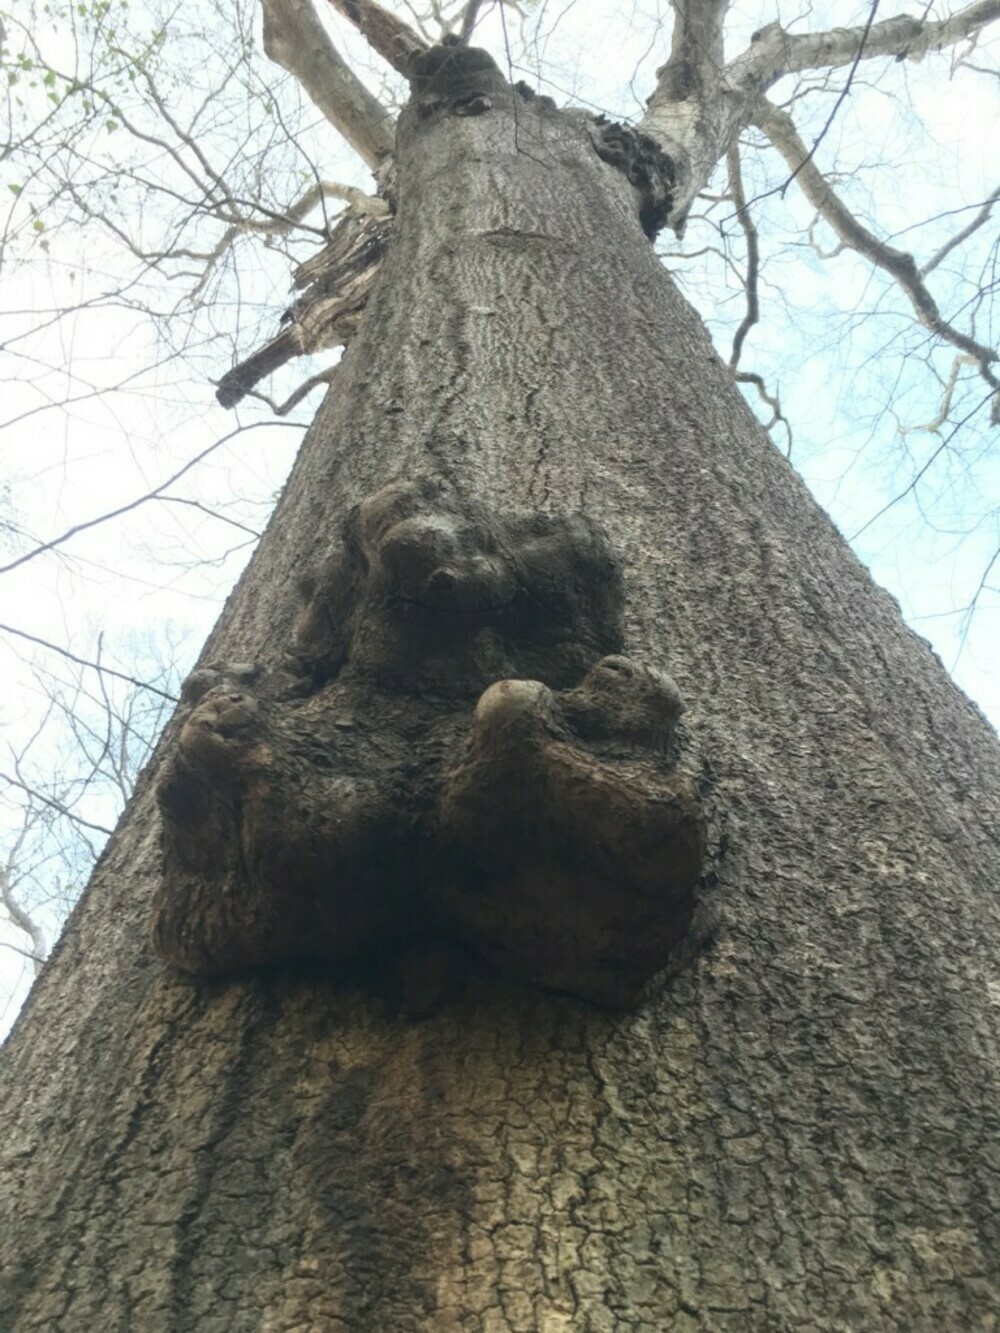 Looking up the trunk of a huge old tree, with a burl a few feet off the ground.